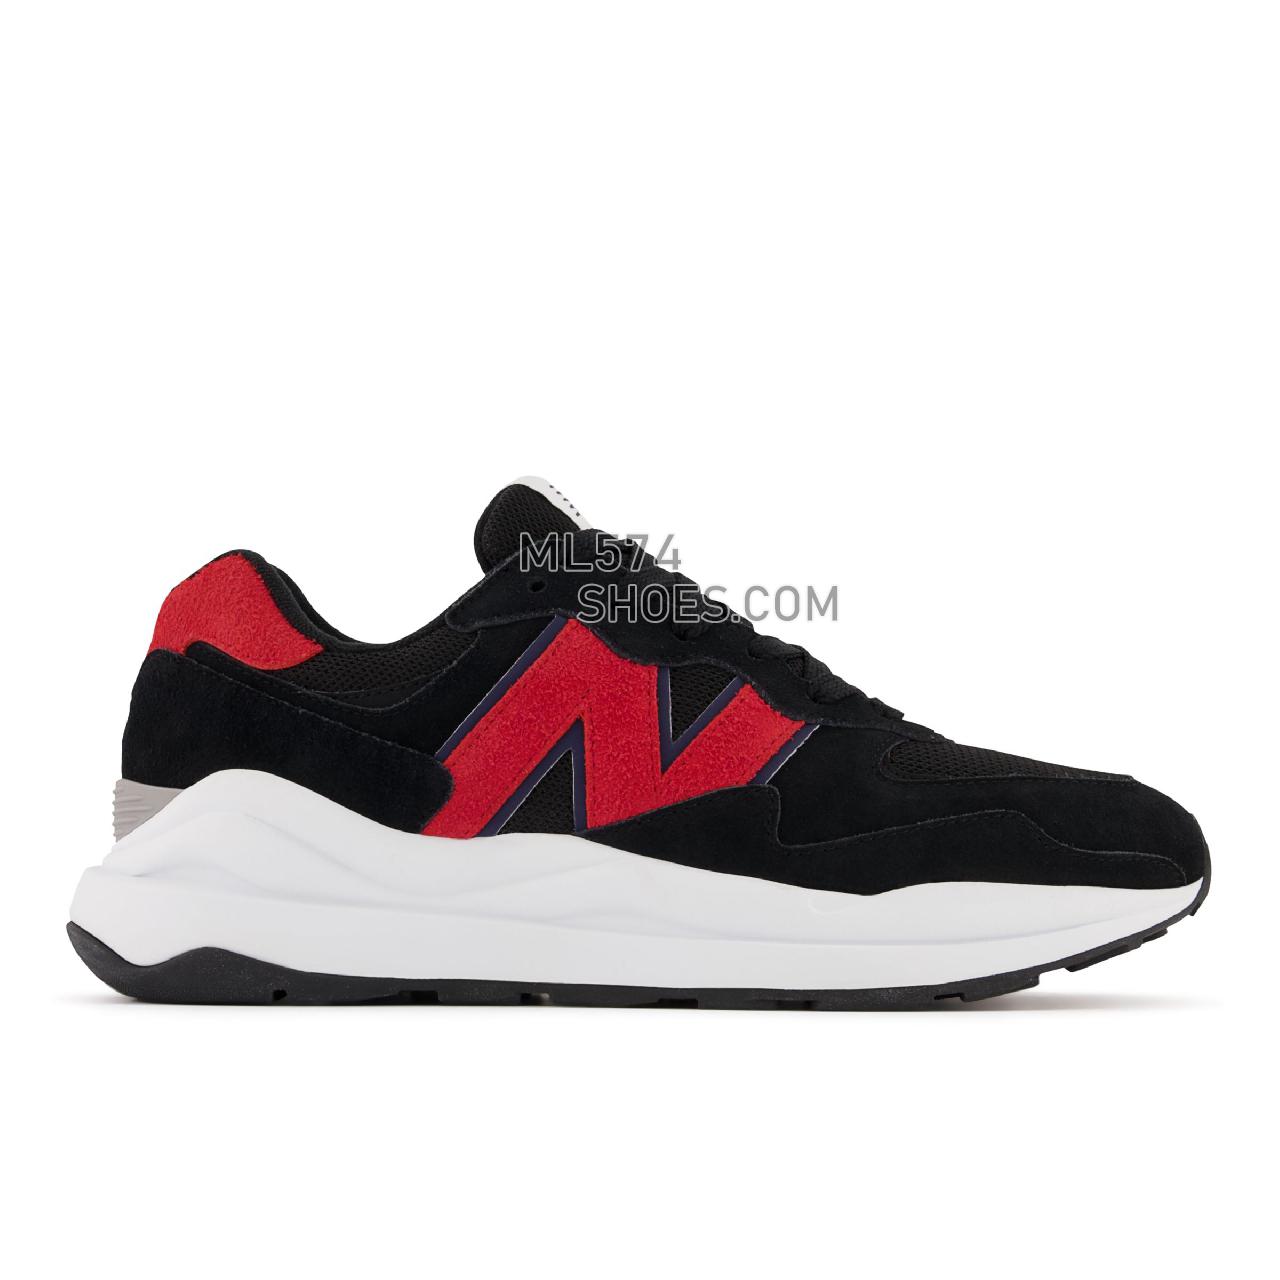 New Balance 57/40 - Men's Classic Sneakers - Black with Team Red and Nb Navy - M5740MS1